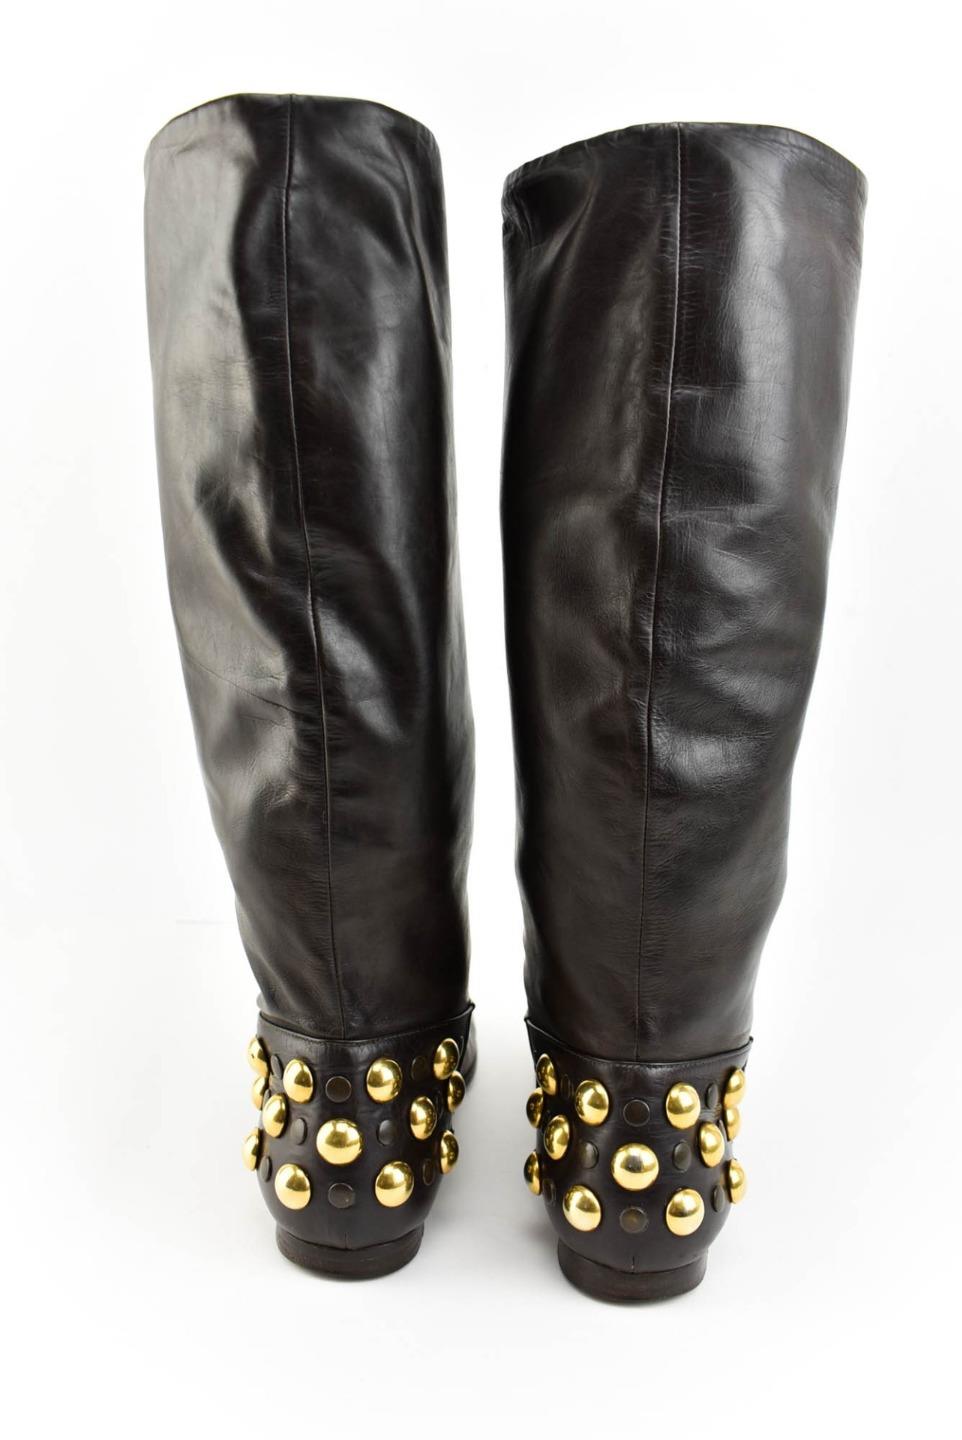 GUCCI Brown Leather & Gold Studded, Tall Moto Boots Sz 6